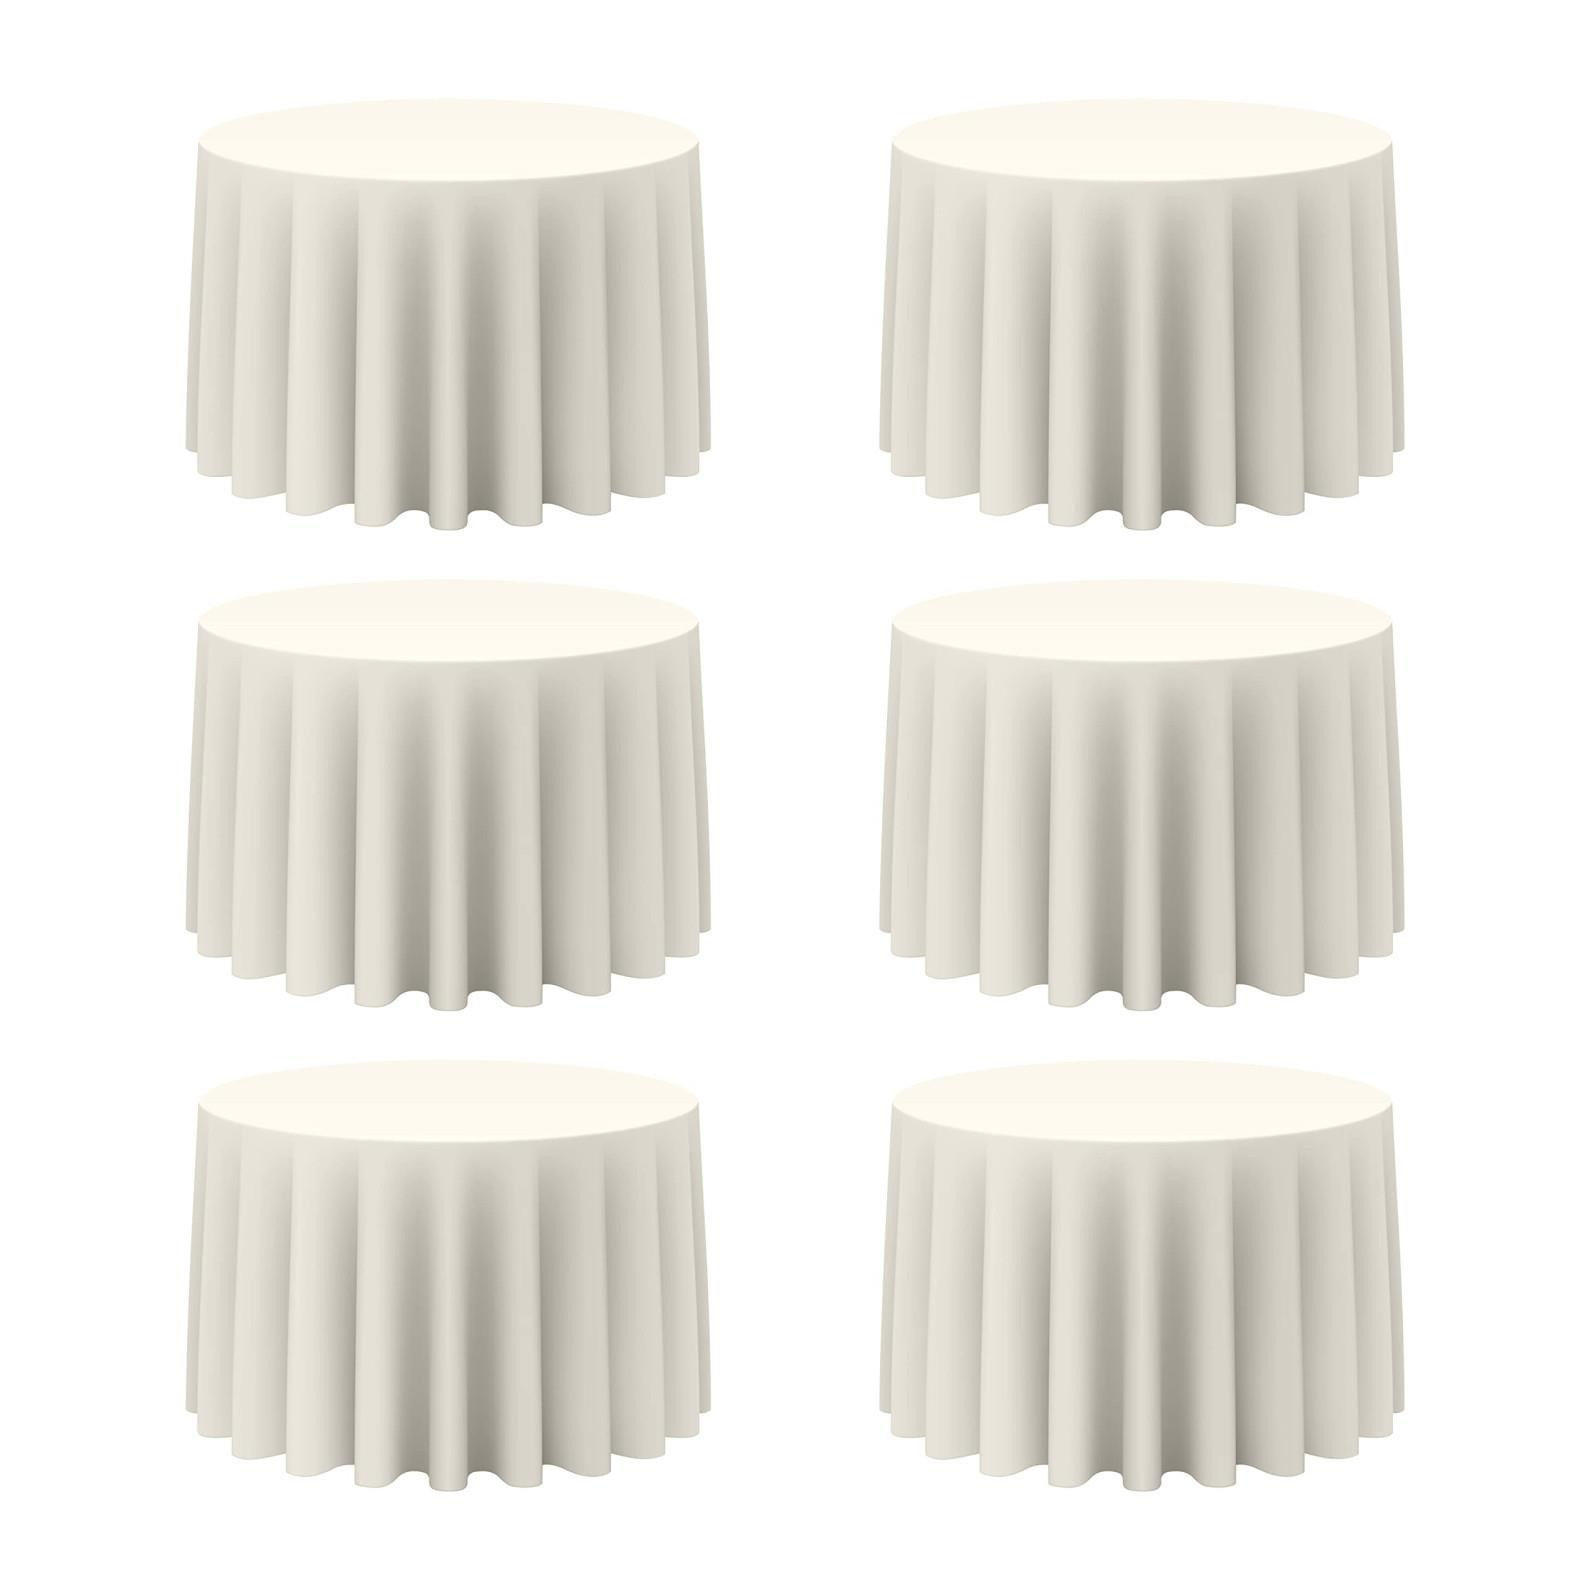 BRILLMAX 6 Pack Ivory Round Tablecloths 108 Inch -